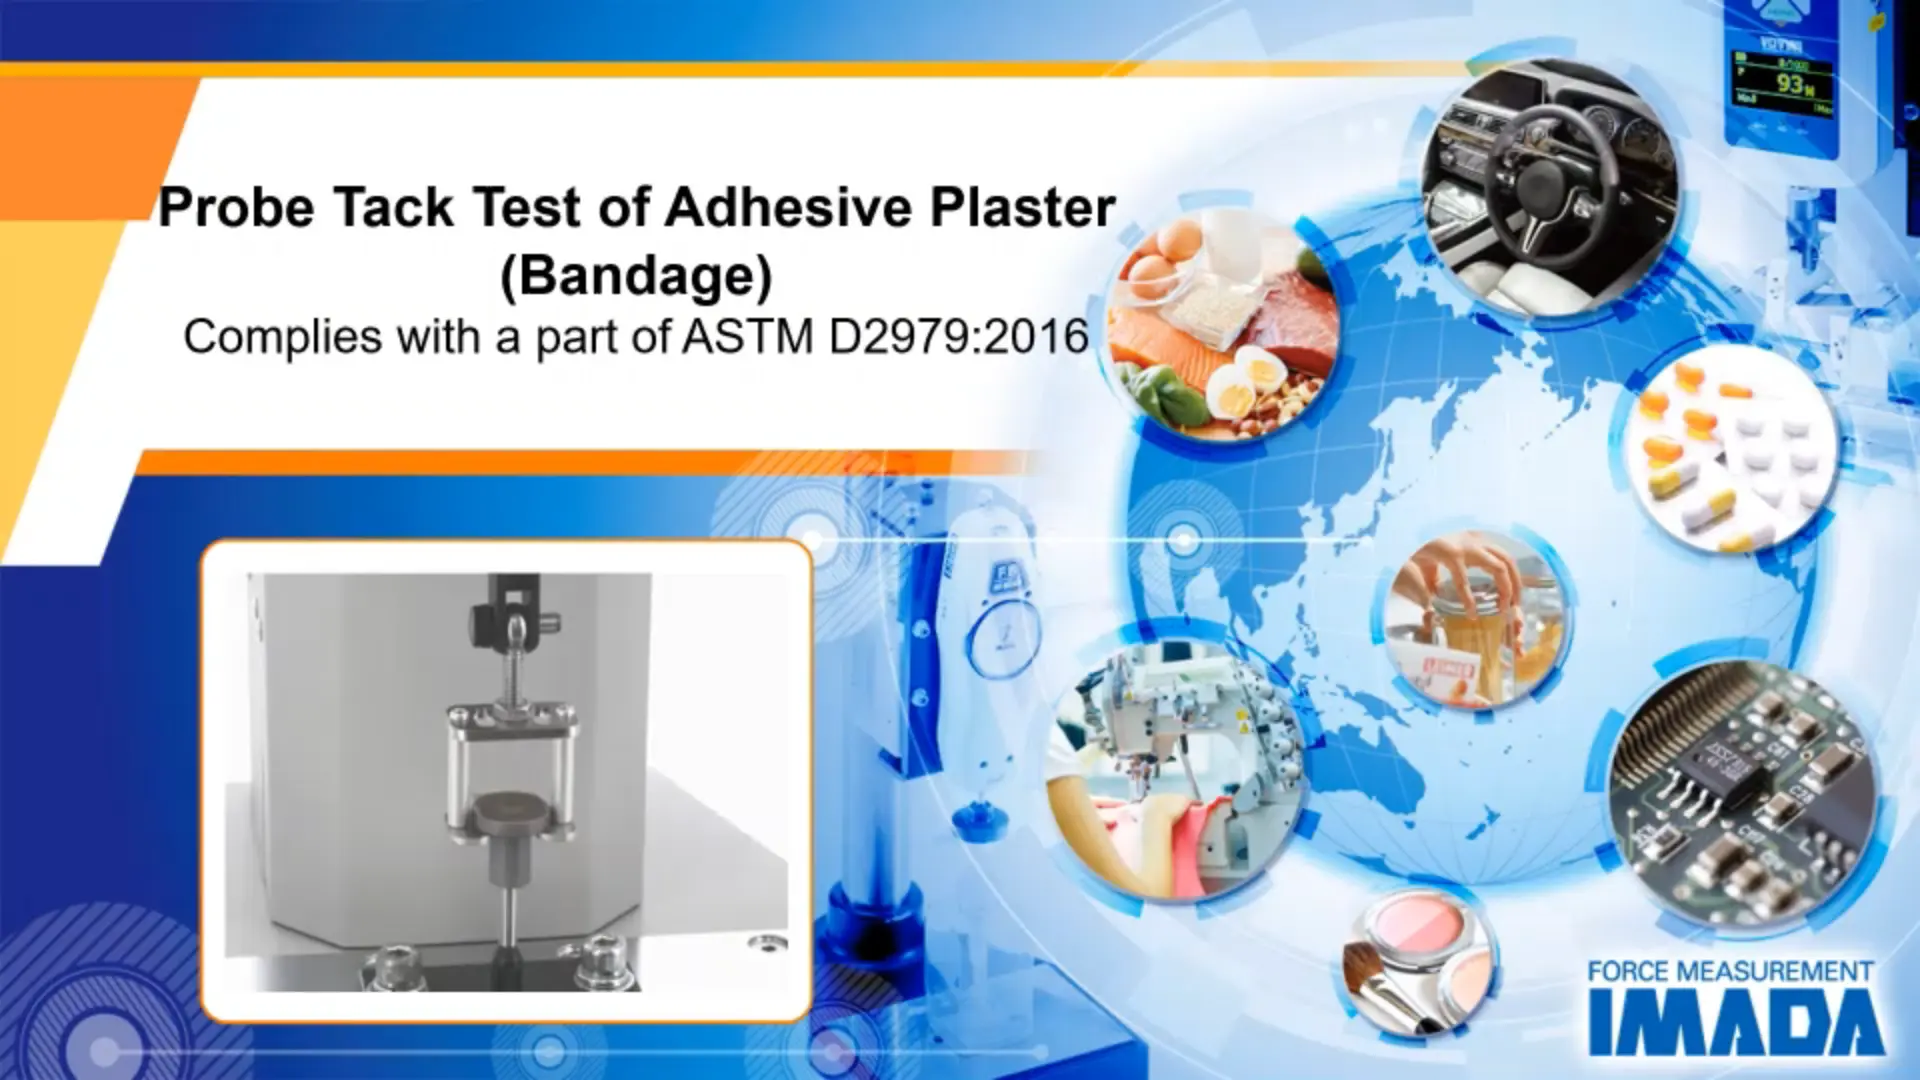 Probe tack test of adhesive plaster (bandage)(Complies with the correspoinding part of ASTM D2979)